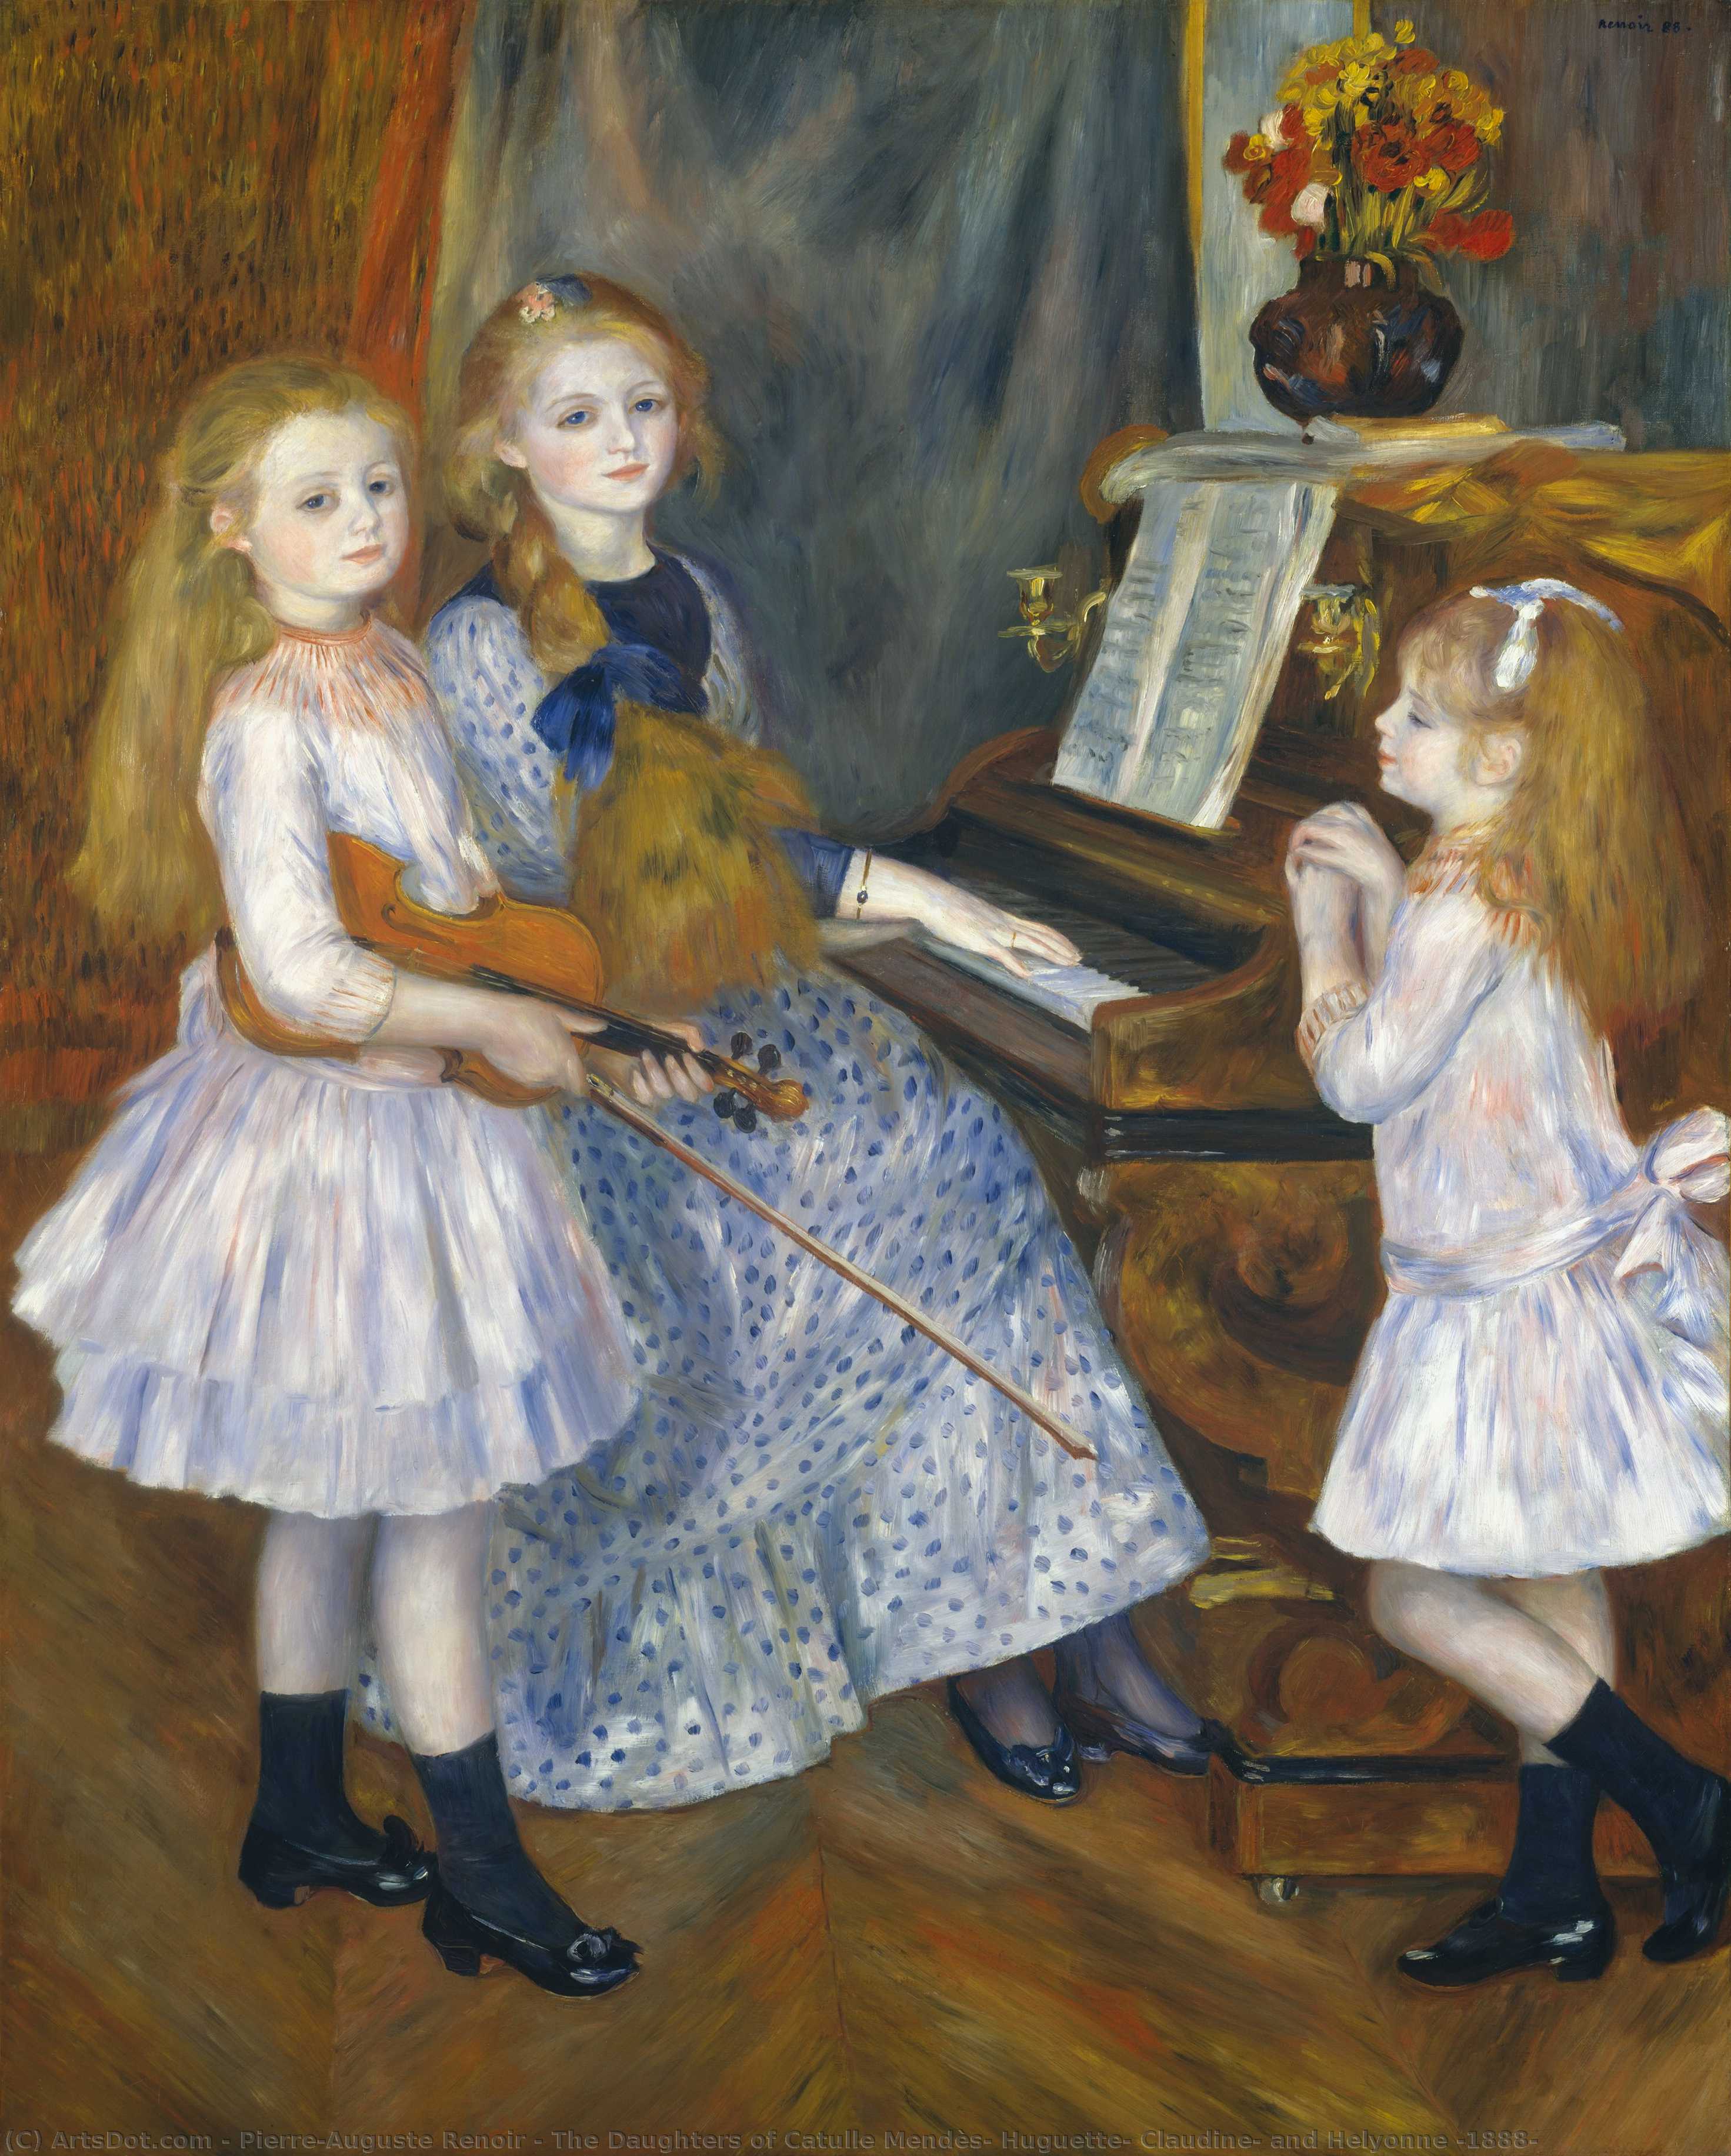 WikiOO.org - Encyclopedia of Fine Arts - Maalaus, taideteos Pierre-Auguste Renoir - The Daughters of Catulle Mendès, Huguette, Claudine, and Helyonne (1888)